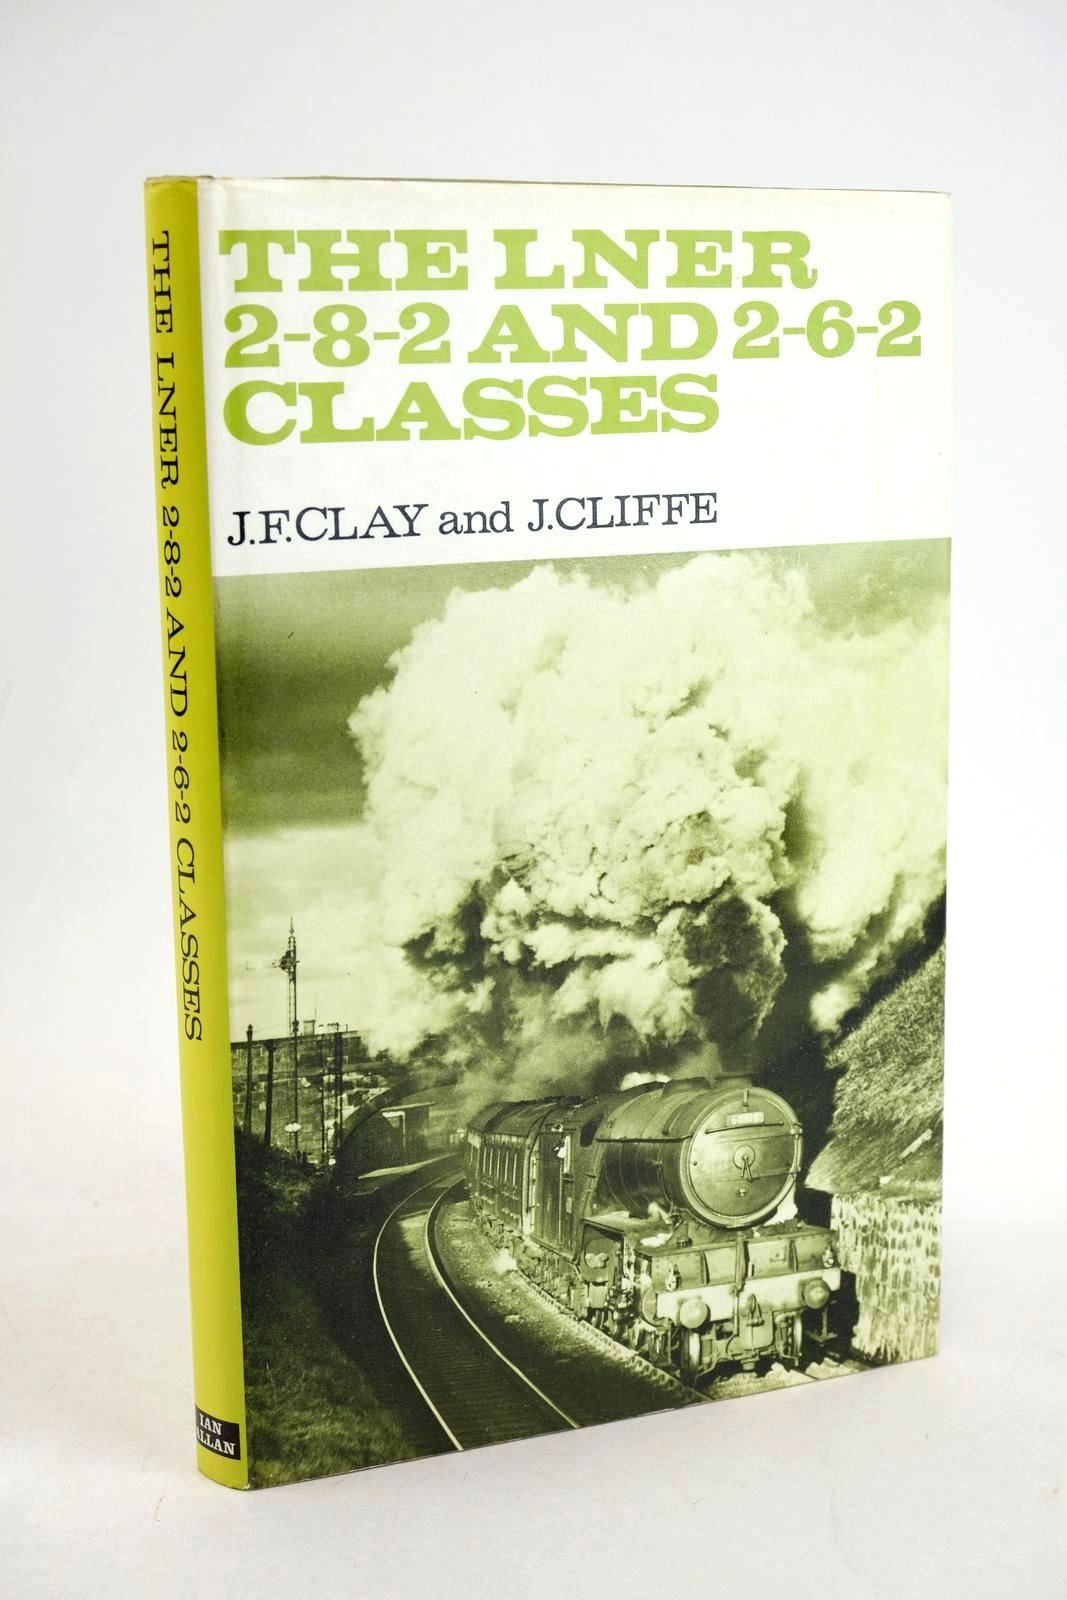 Photo of THE LNER 2-8-2 AND 2-6-2 CLASSES written by Clay, J.F. Cliffe, J. published by Ian Allan Ltd. (STOCK CODE: 1327407)  for sale by Stella & Rose's Books